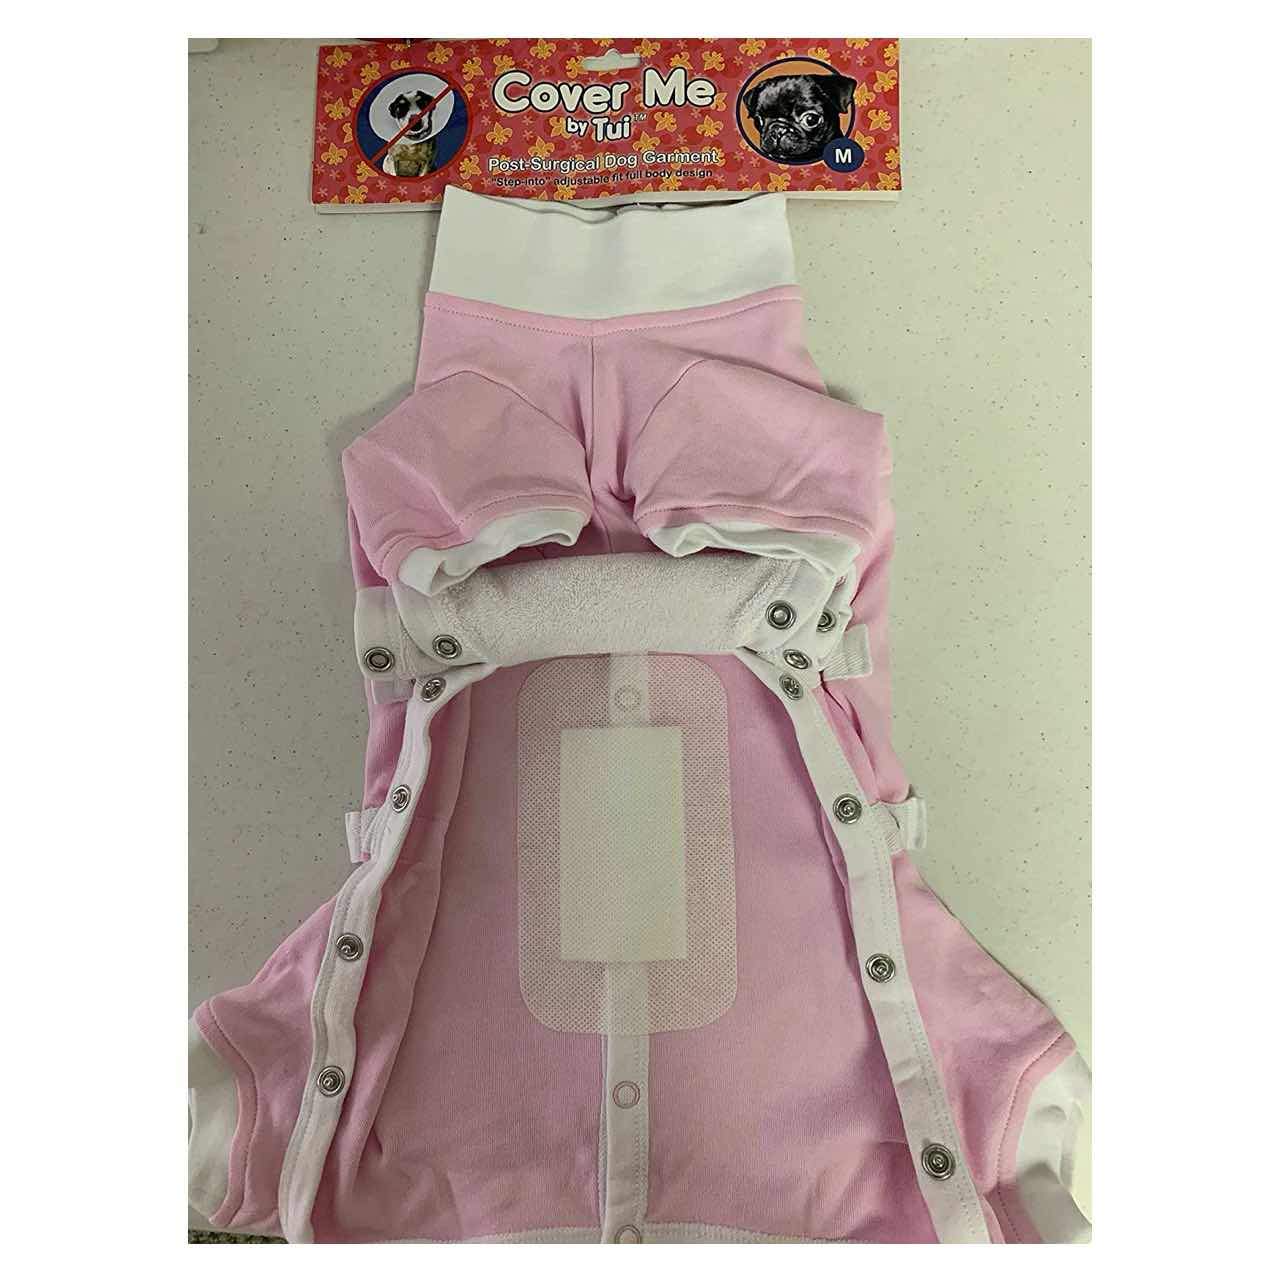 A large Cover Me Bandage for Dogs and Cats stuck to the inside of a pink pet recovery suit